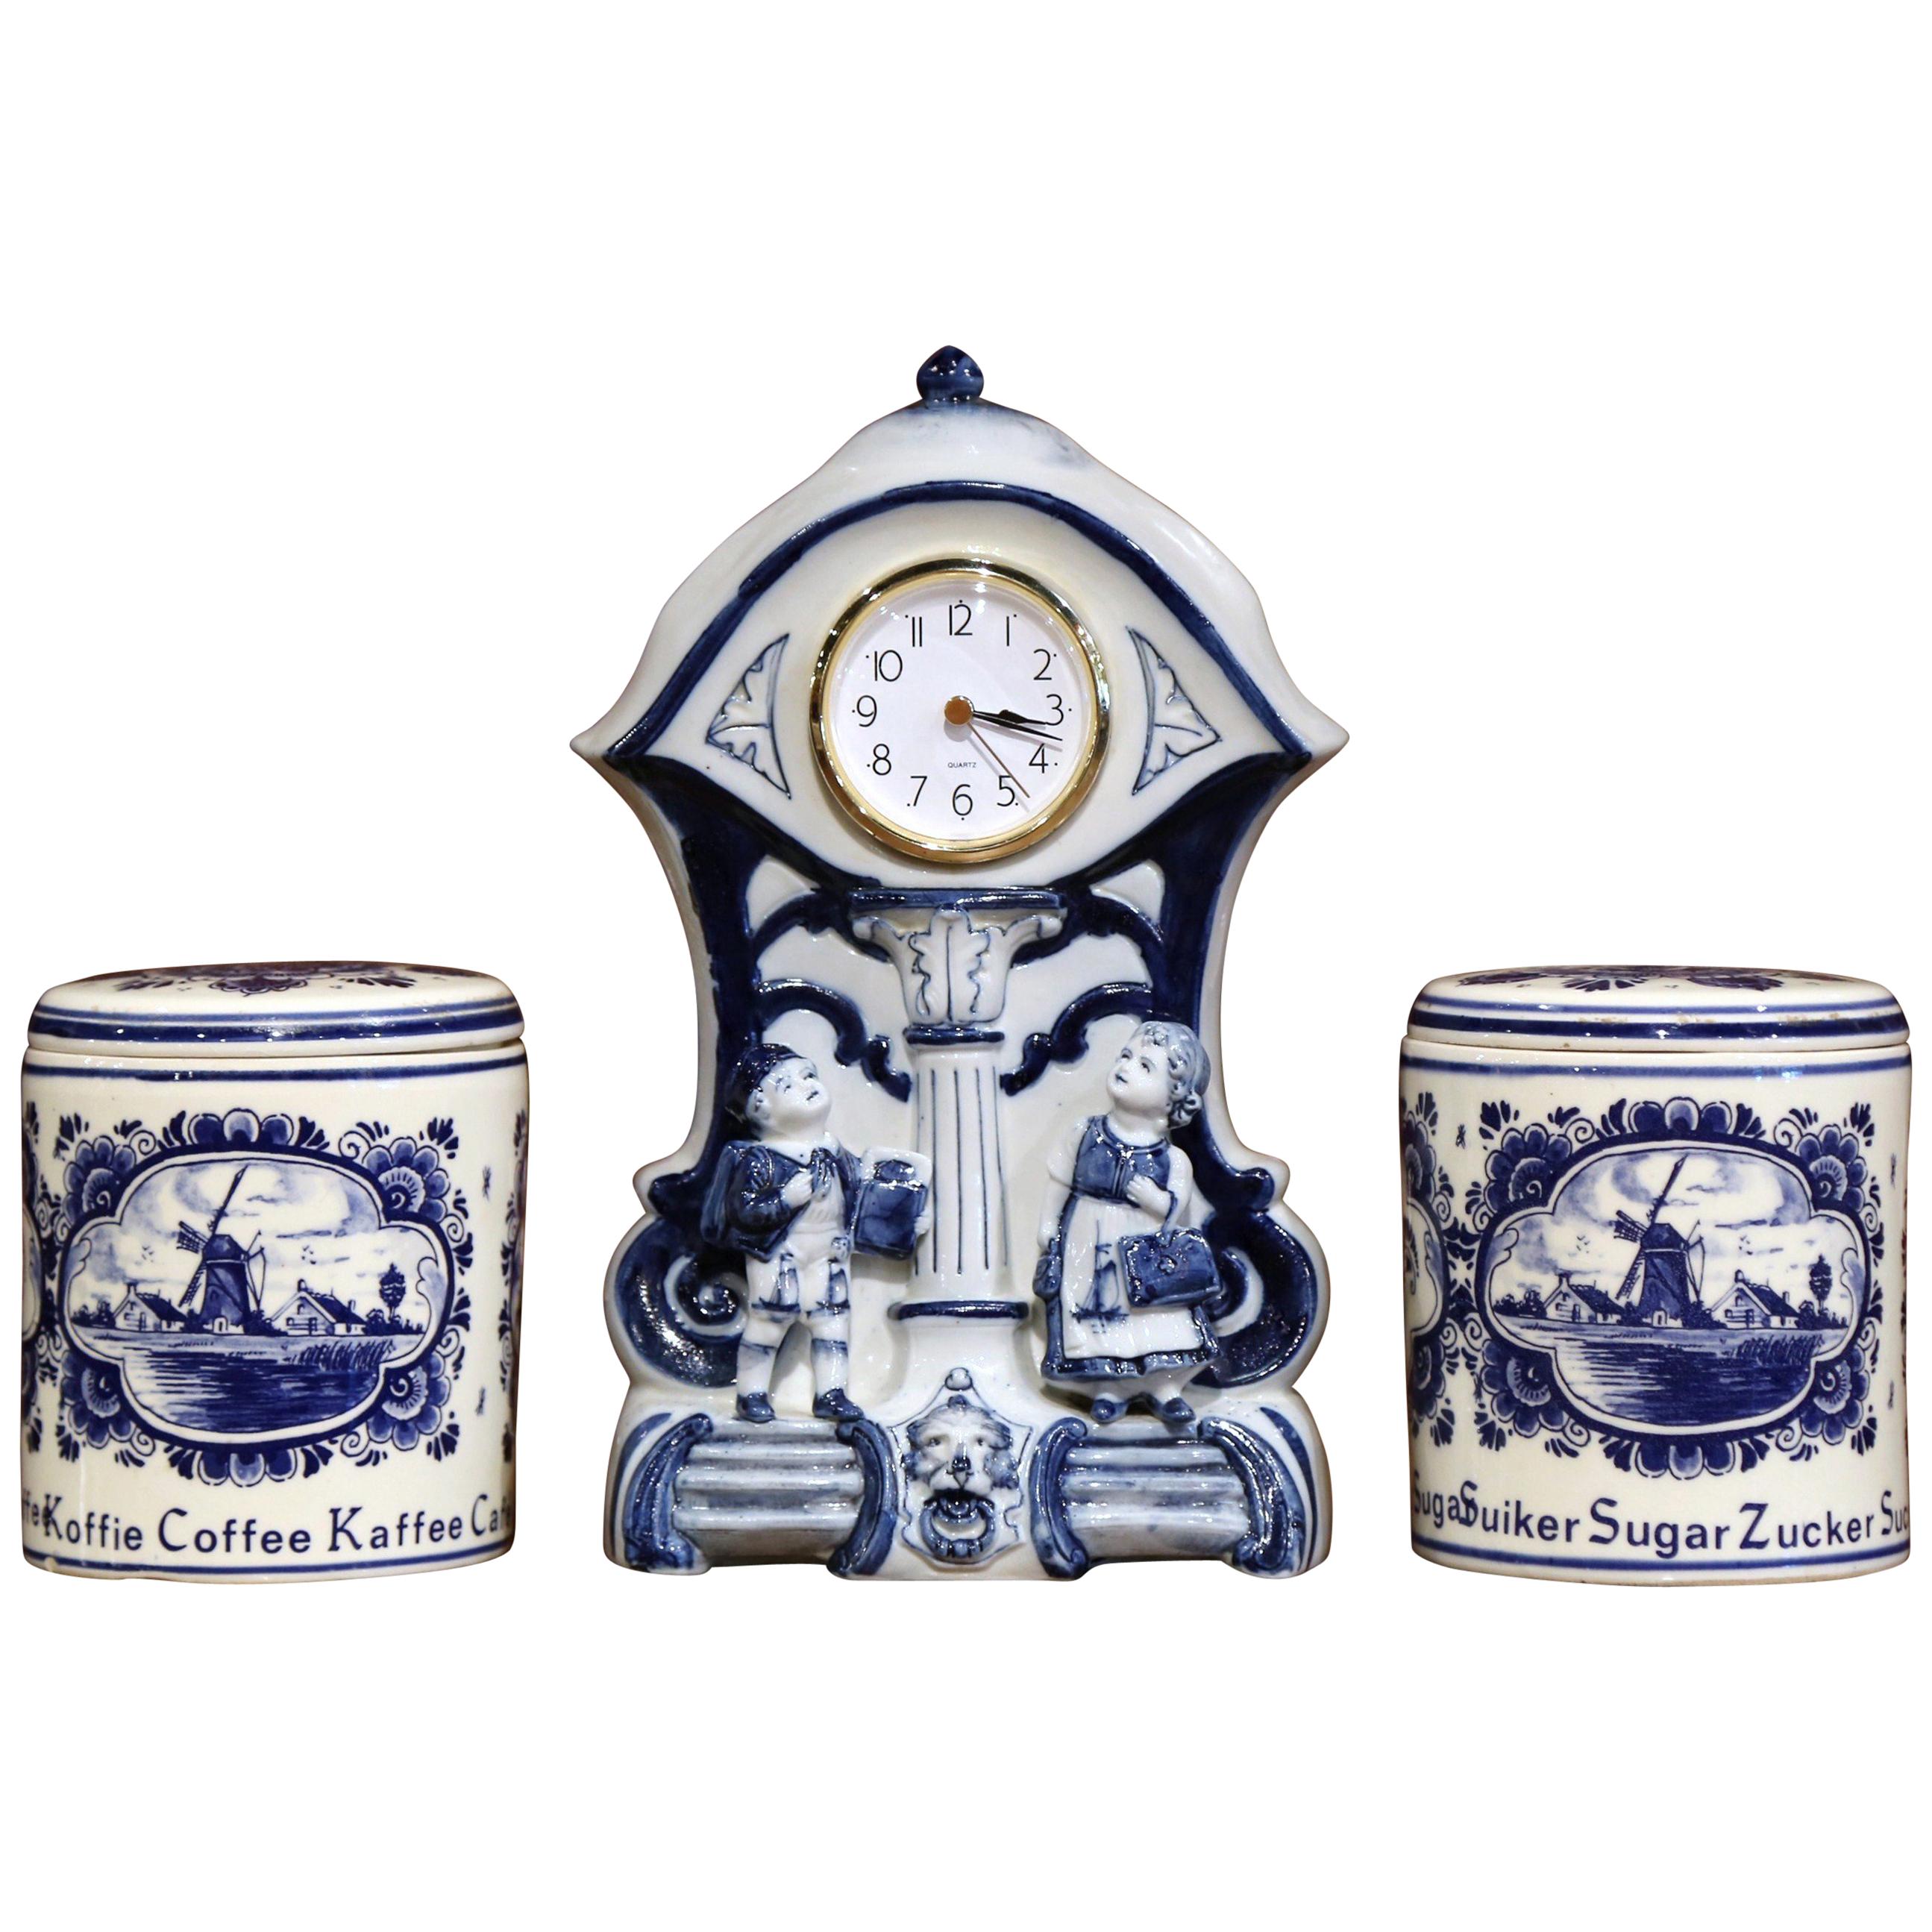 Early 20th Century Dutch and German Three-Piece Delft Canisters and Clock